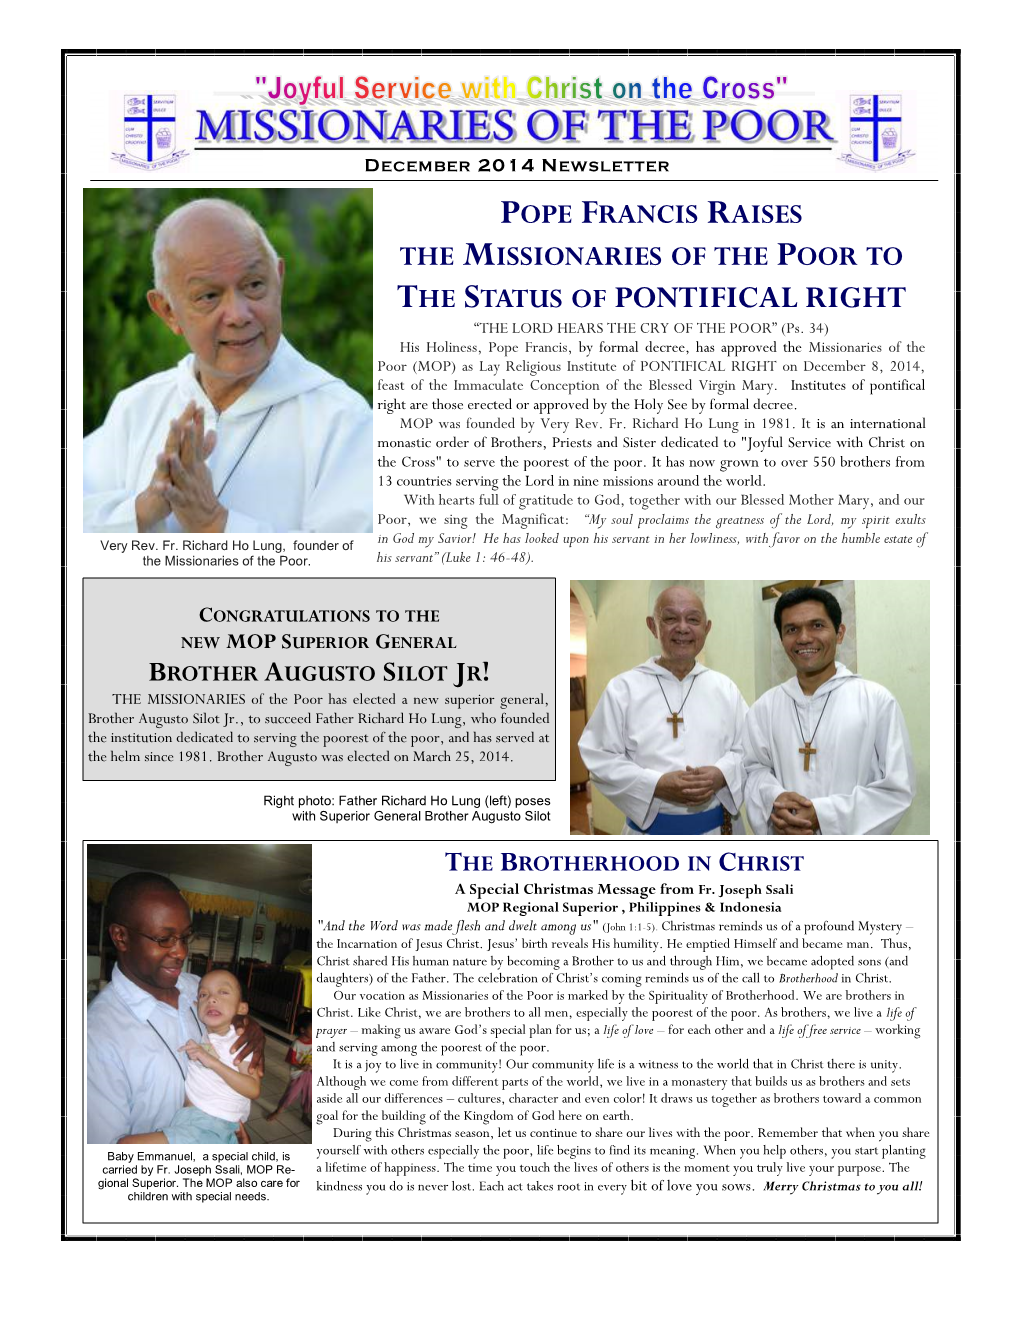 MISSIONARIES of the POOR to the STATUS of PONTIFICAL RIGHT “THE LORD HEARS the CRY of the POOR” (Ps